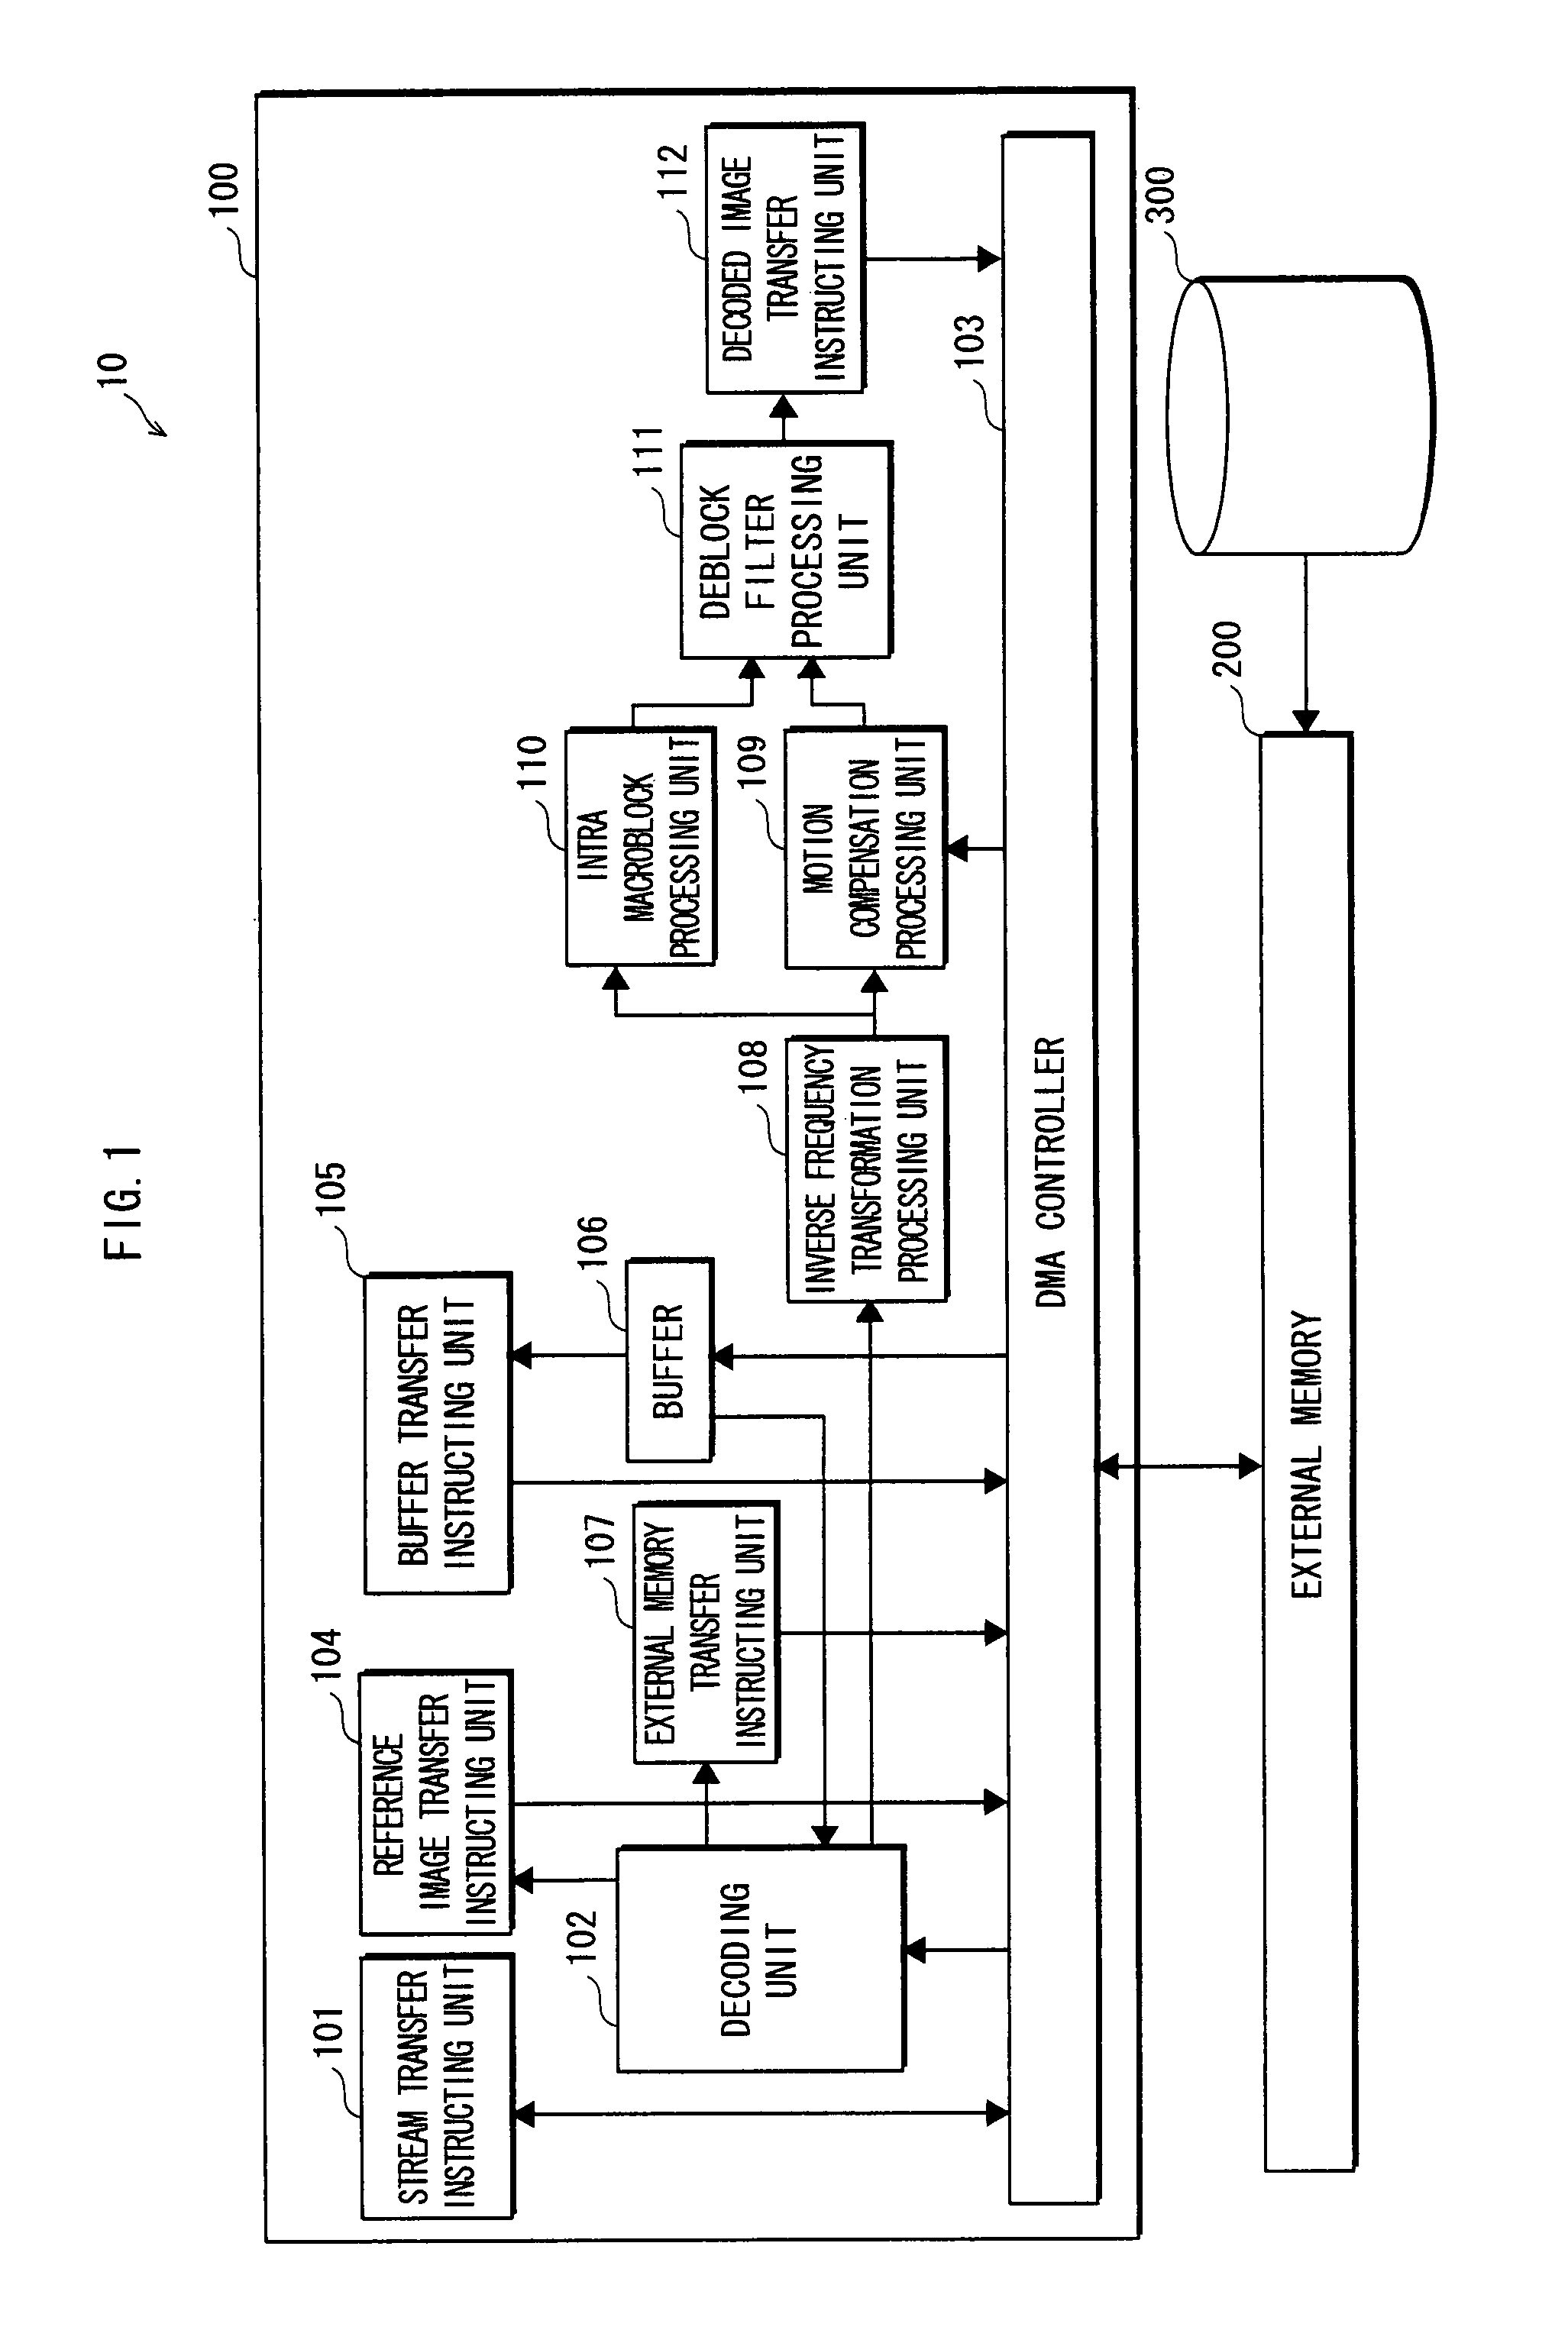 Decoding circuit, decoding device, and decoding system